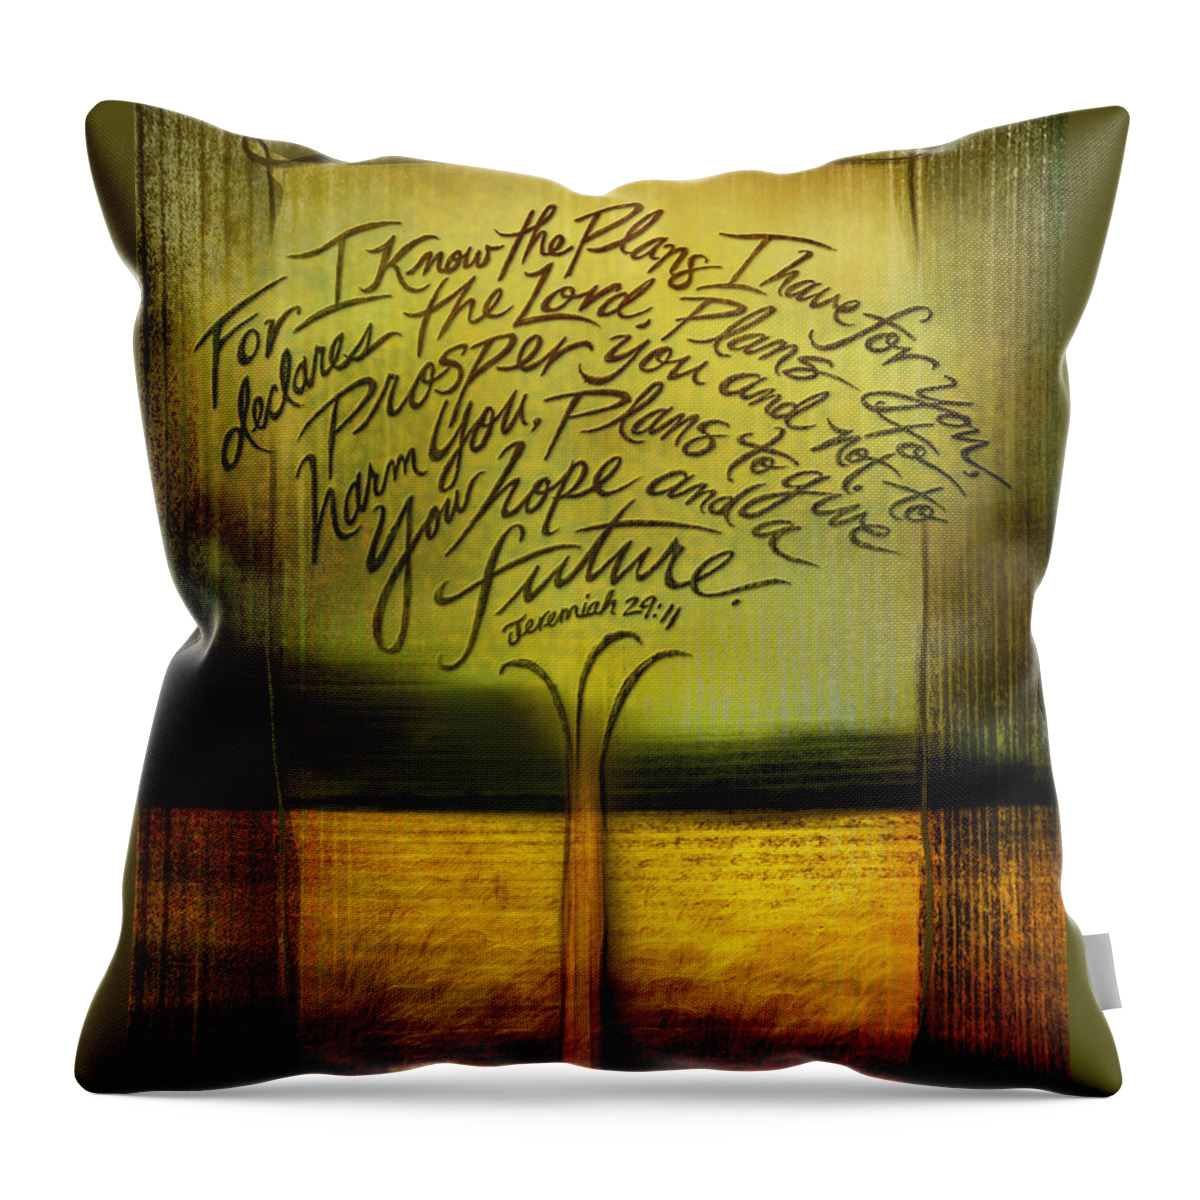 Jeremiah 29:11 Artwork Throw Pillow featuring the mixed media God's Plans by Shevon Johnson